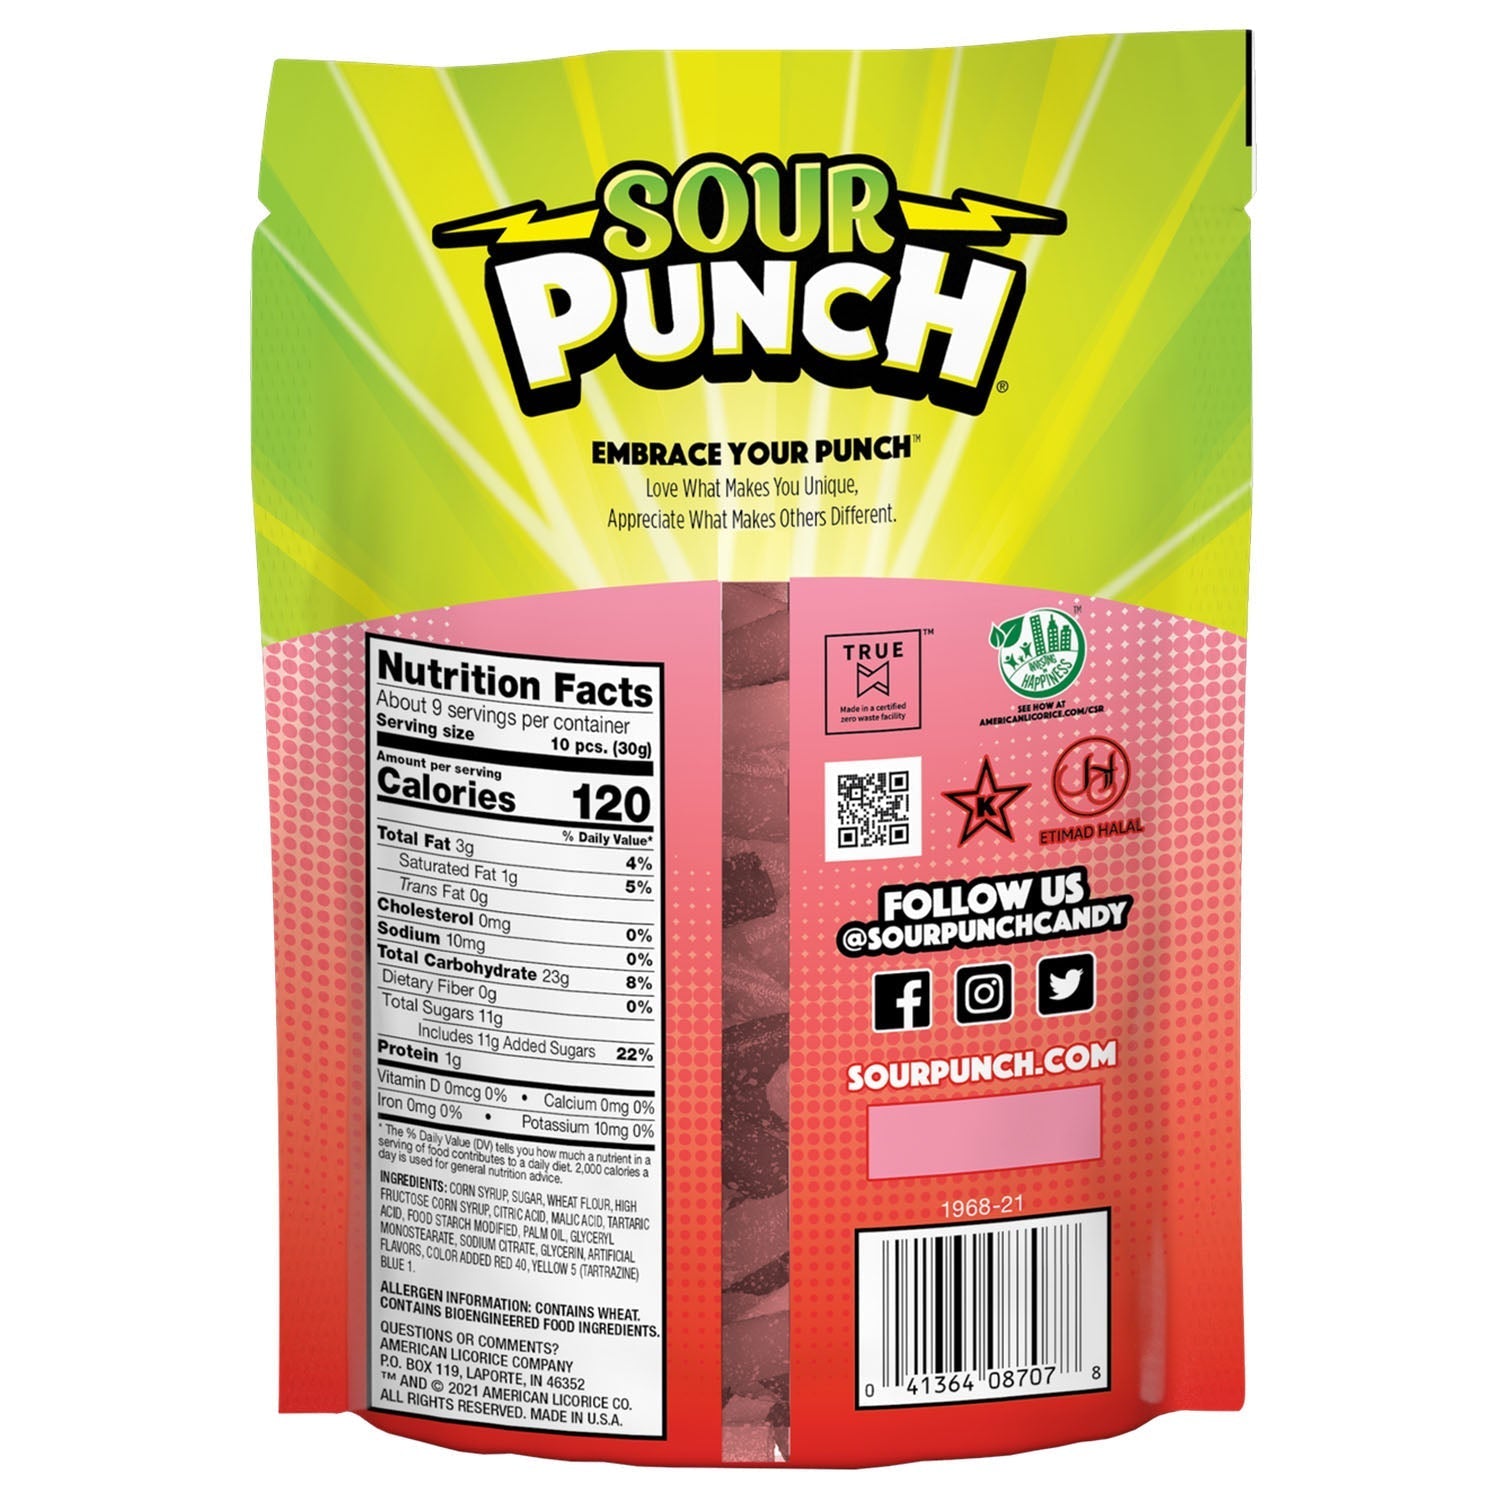 Sour Punch Bites® Rad Red Candy Flavors 9oz